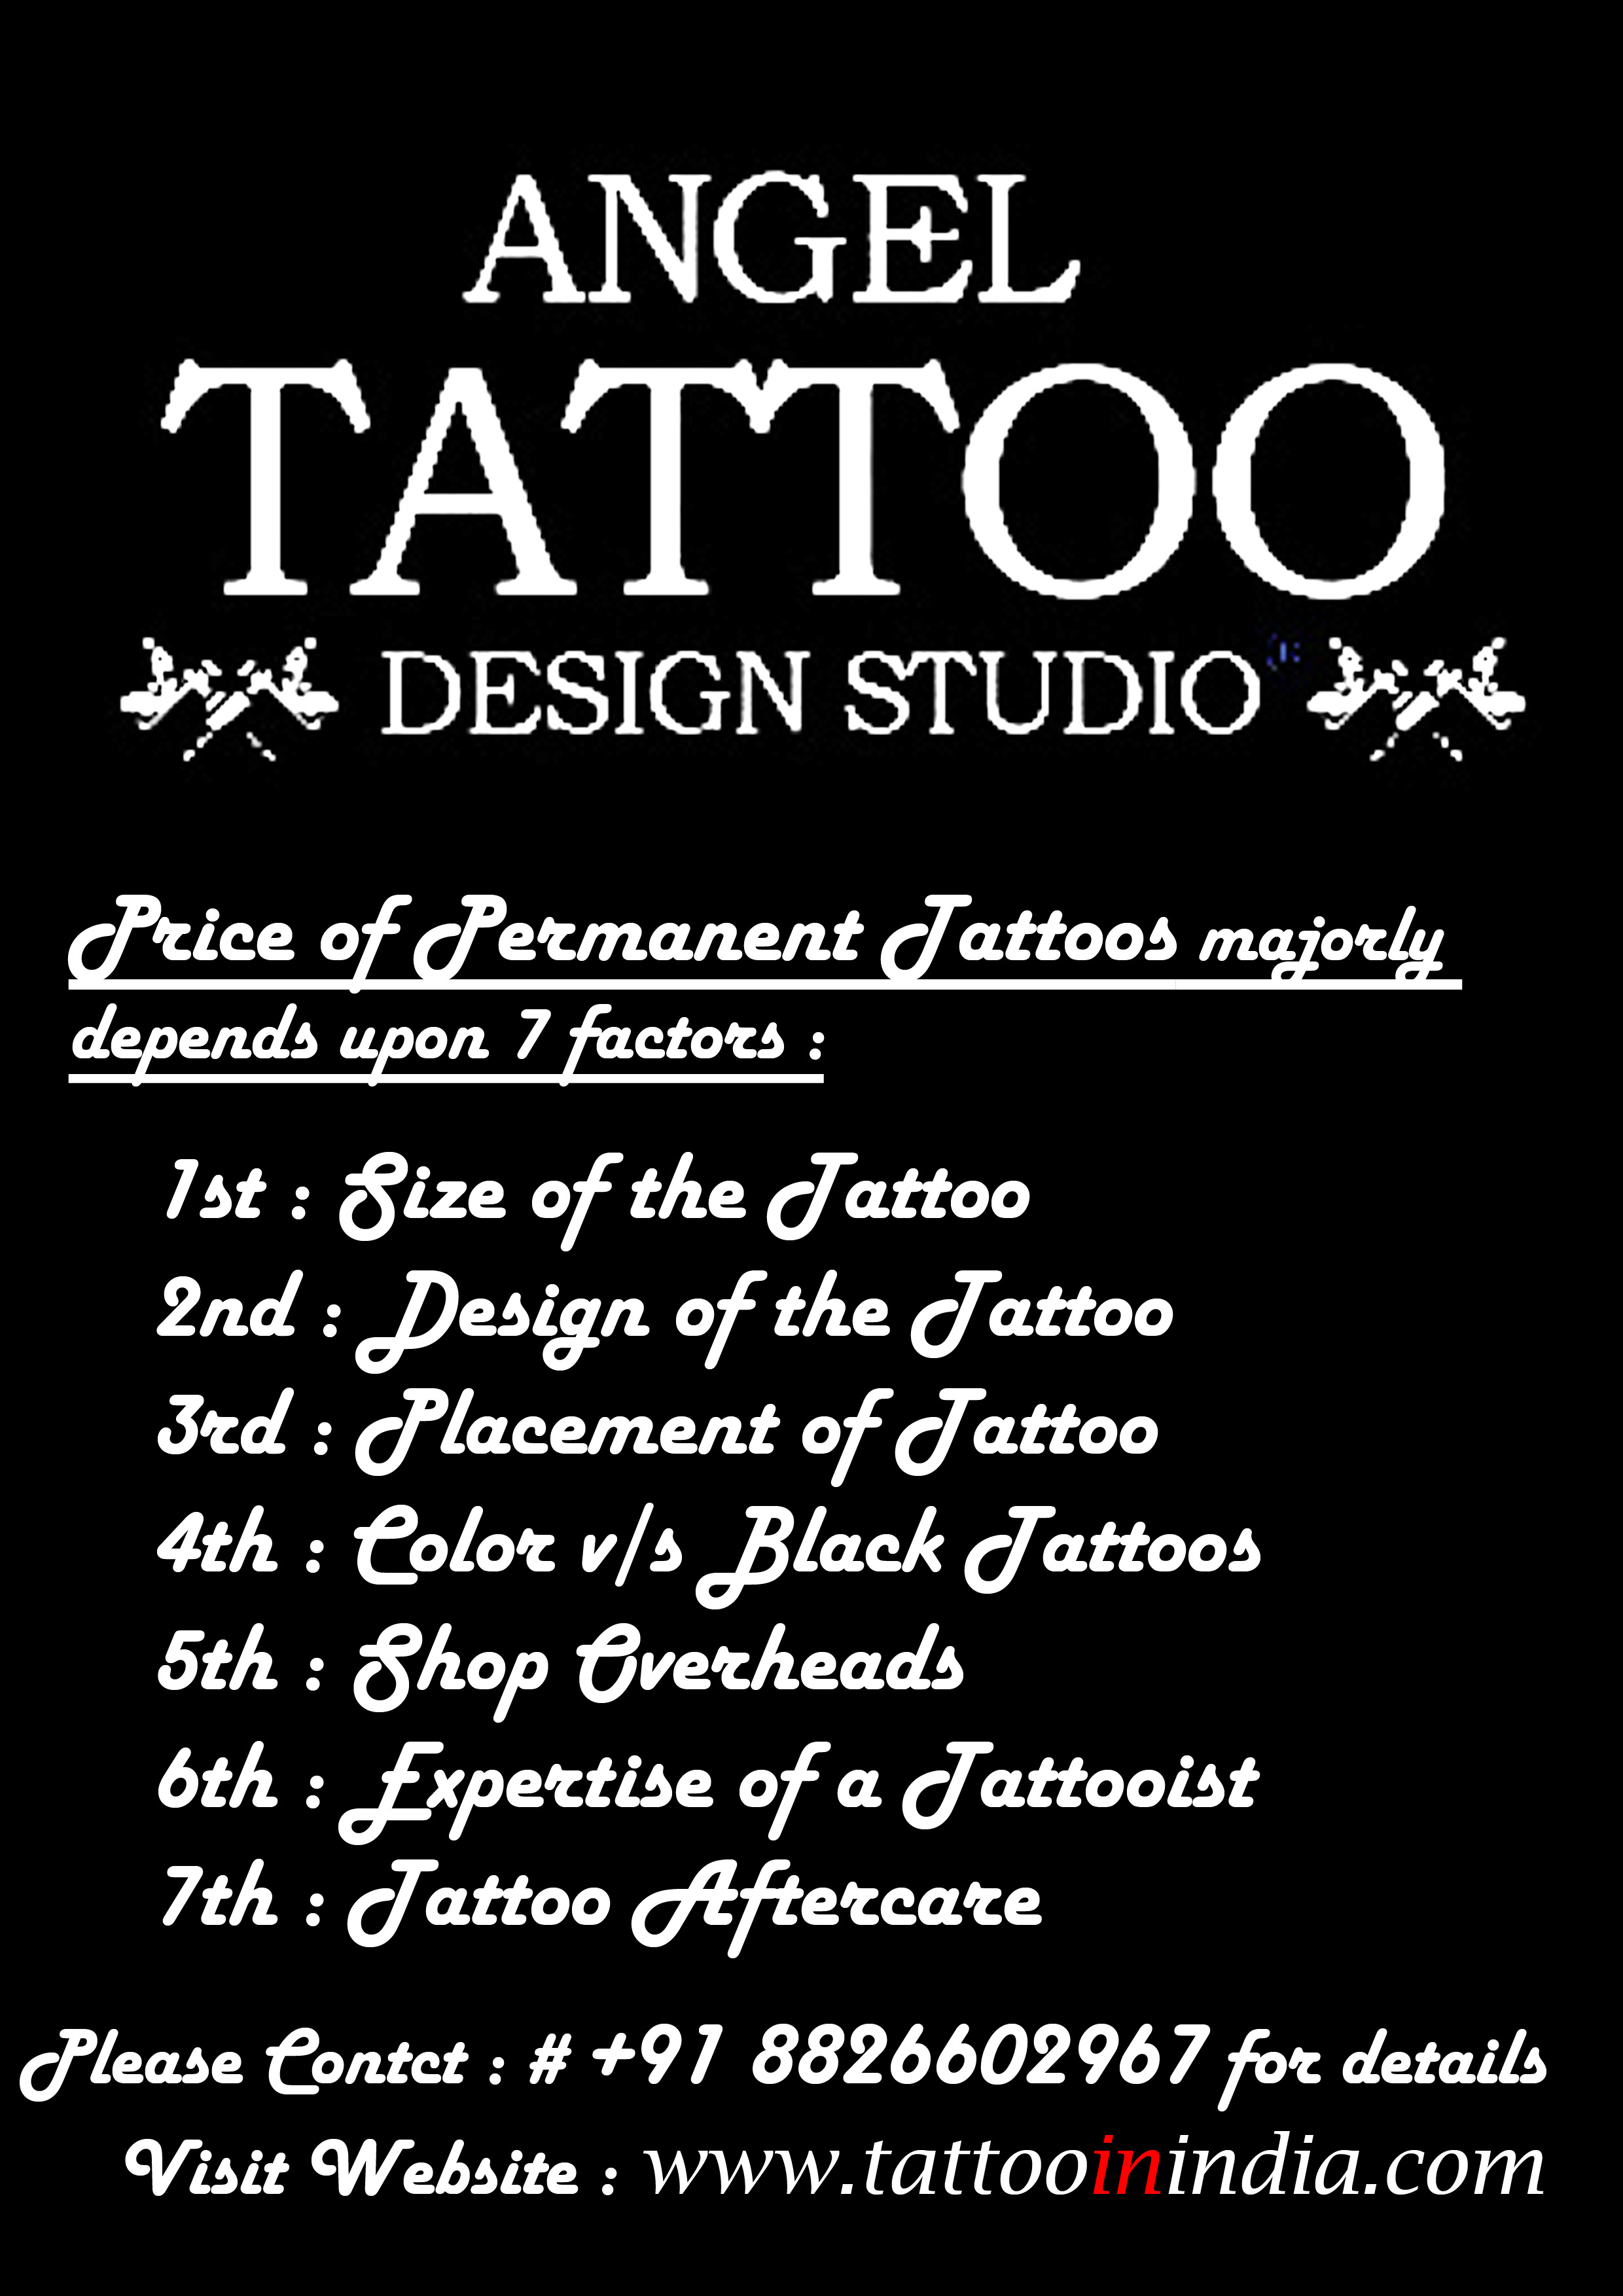 Cost of Permanent Tattoo in Black / Color, Price of getting Permanent